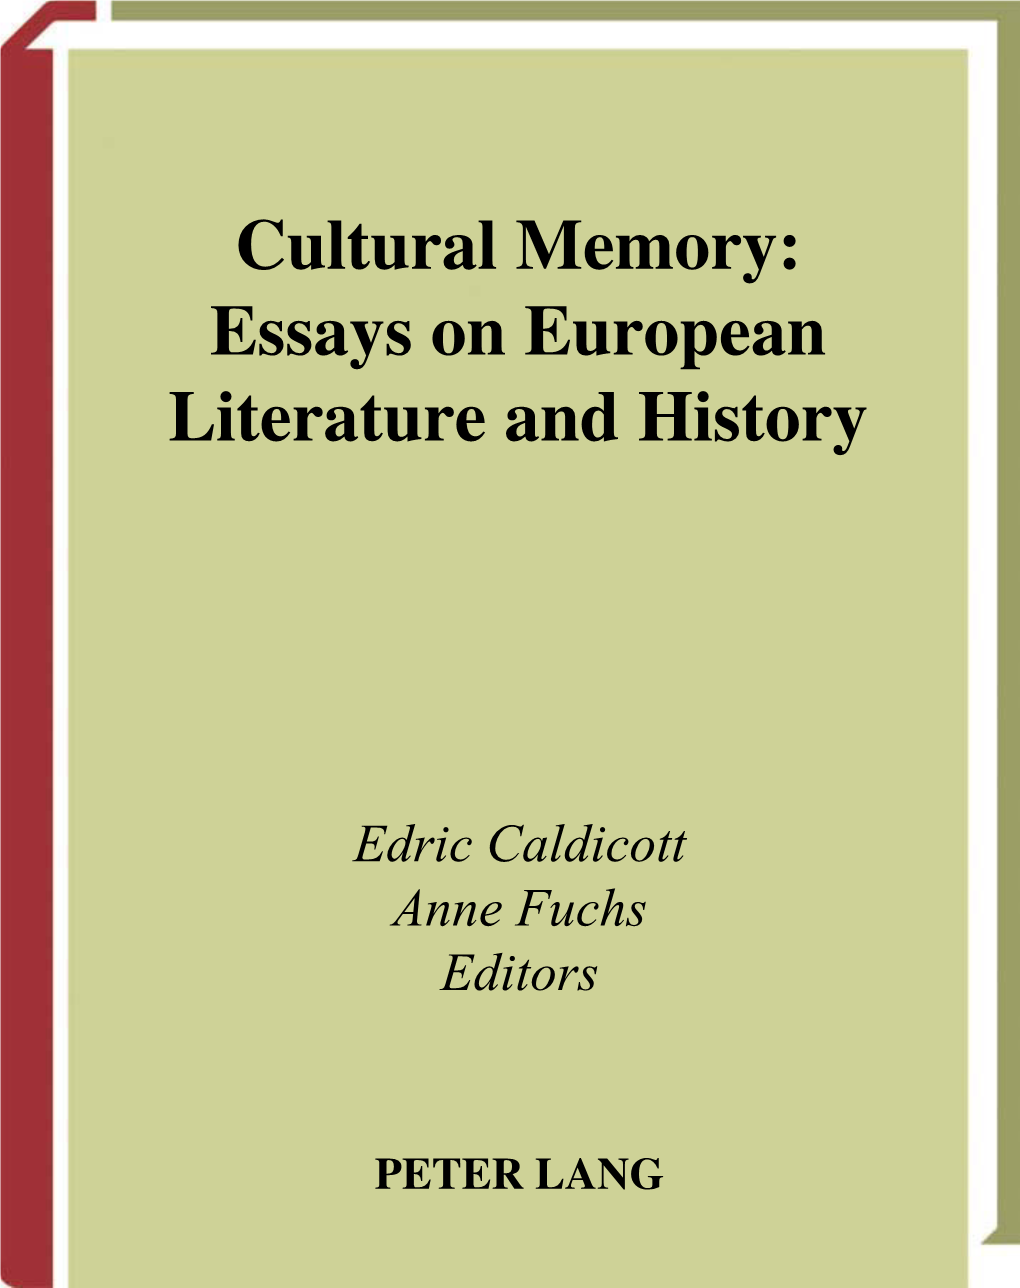 Cultural Memory: Essays on European Literature and History